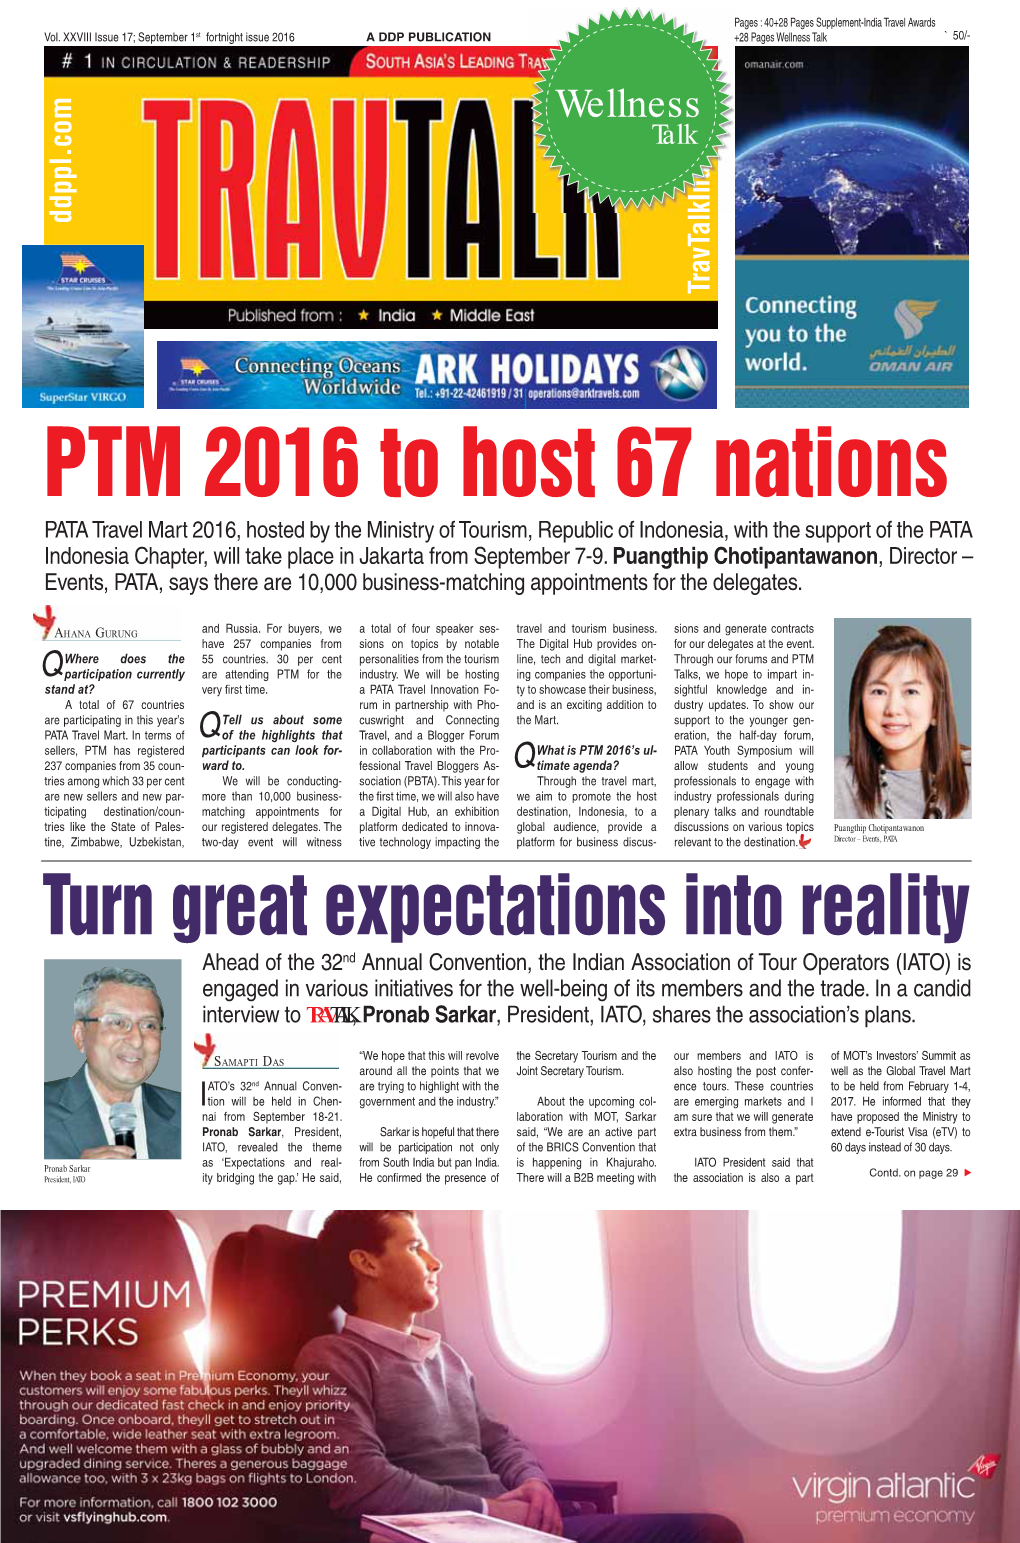 PTM 2016 to Host 67 Nations